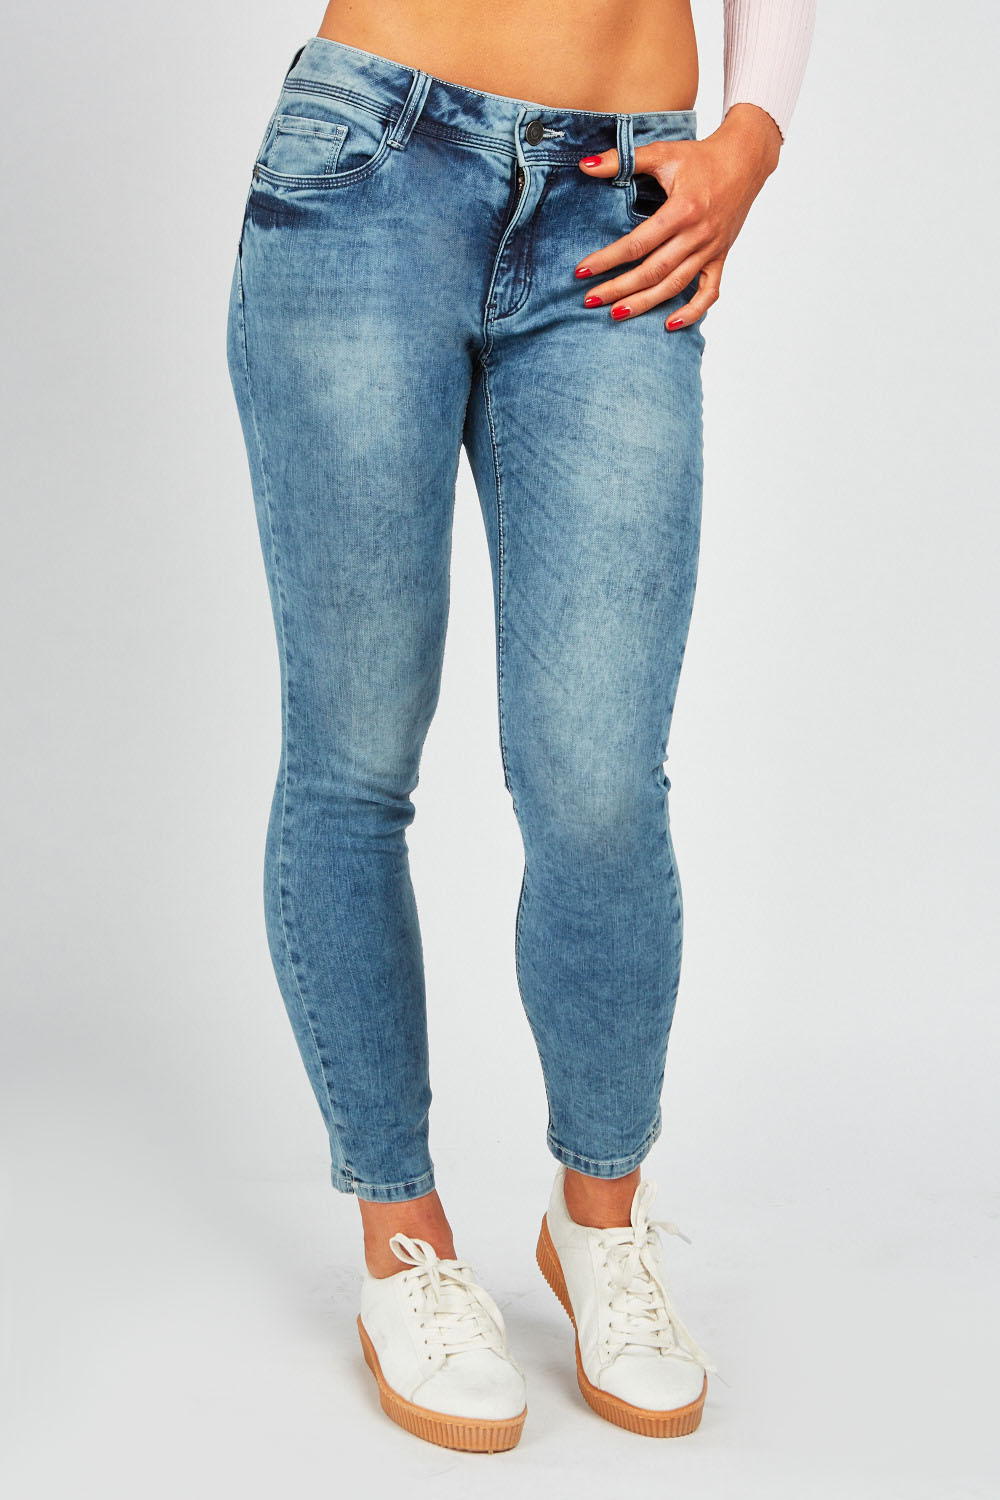 Washed Denim Skinny Push Up Jeans - Just $7